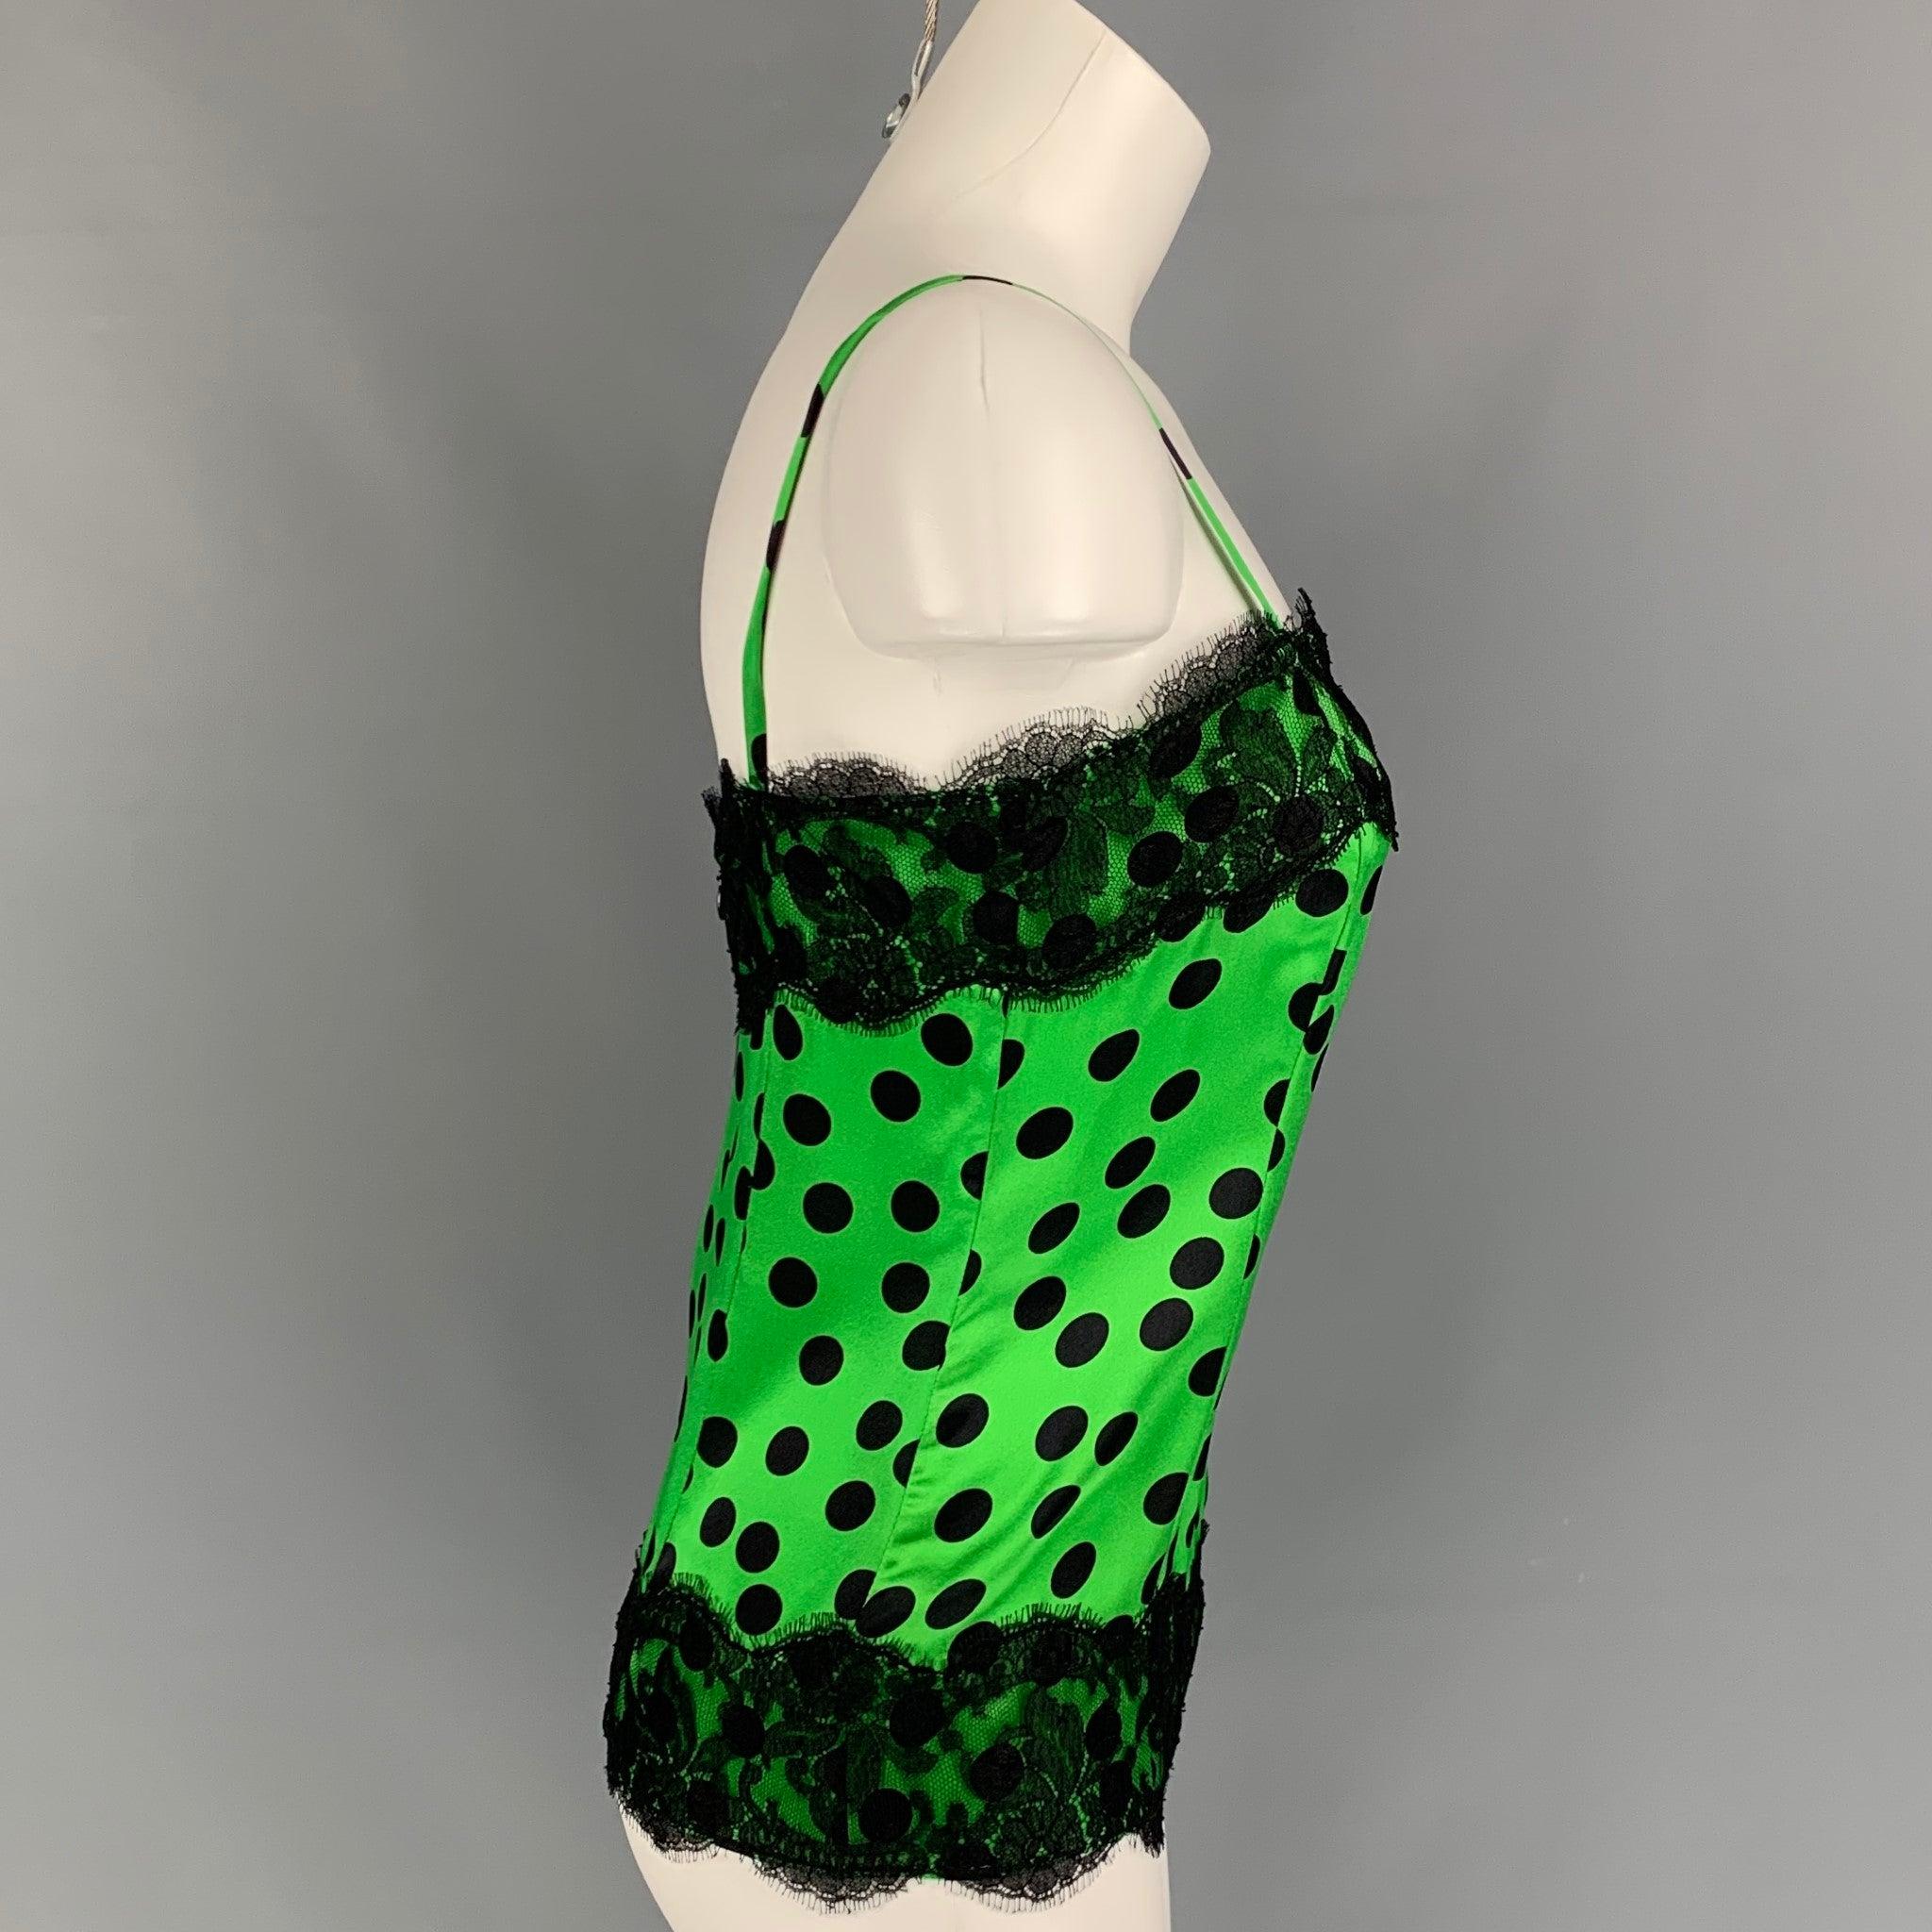 D&G by DOLCE & GABBANA casual top comes in a green & black polka dot silk featuring a lace trim design, spaghetti straps, and a back zip up closure.
Excellent
Pre-Owned Condition. 

Marked:   44 

Measurements: 
  Bust: 32 inches  Length: 14 inches